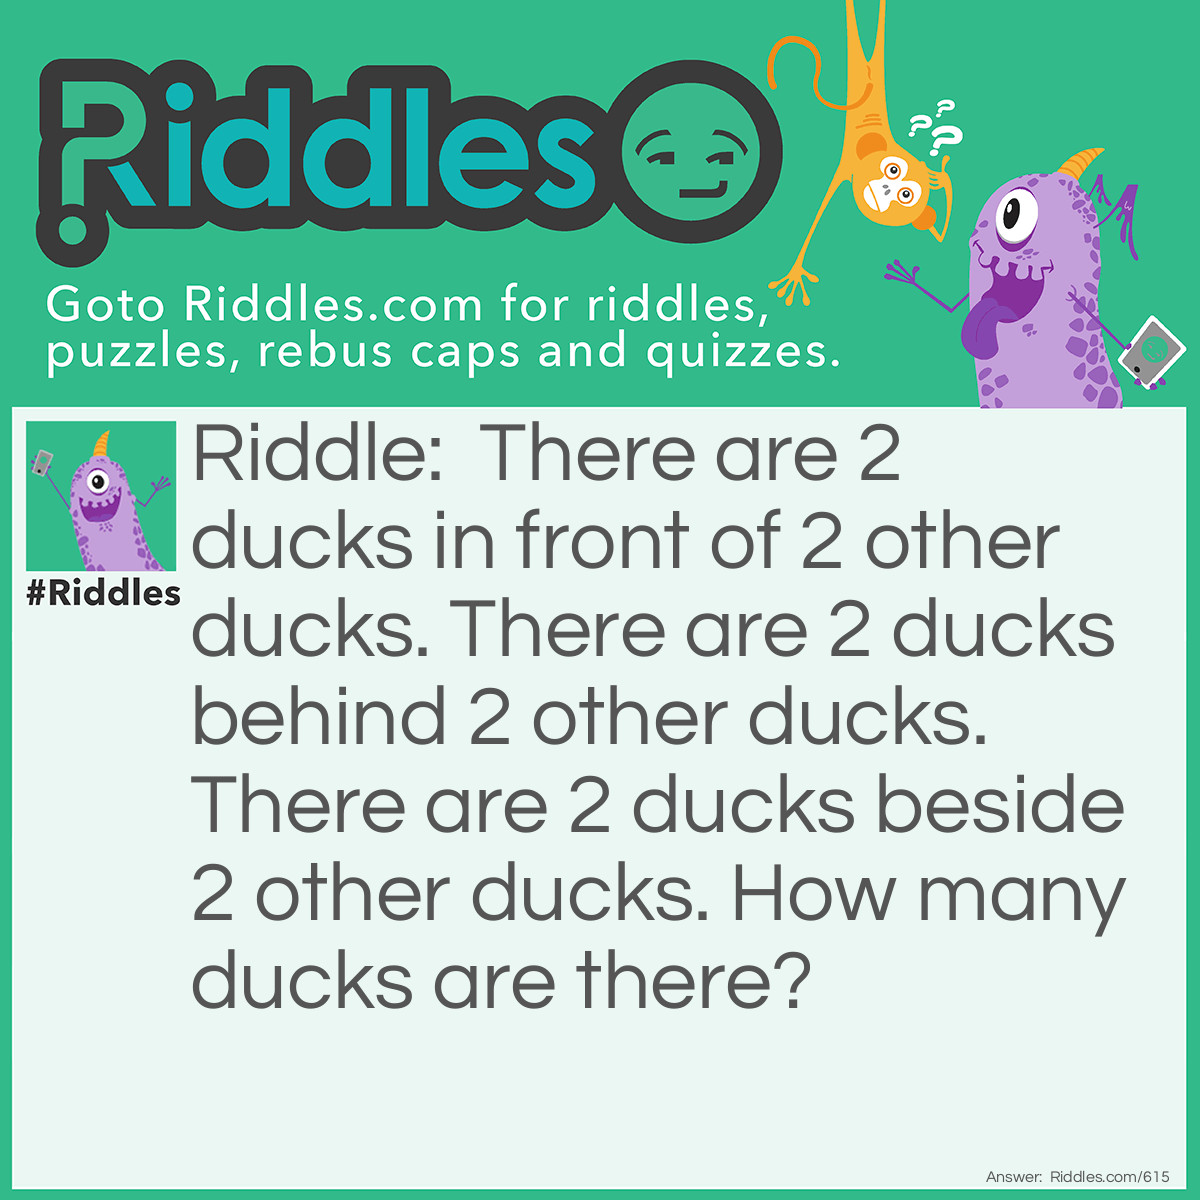 Riddle: There are 2 ducks in front of 2 other ducks. There are 2 ducks behind 2 other ducks. There are 2 ducks beside 2 other ducks. How many ducks are there? Answer: Just four, in a square formation.